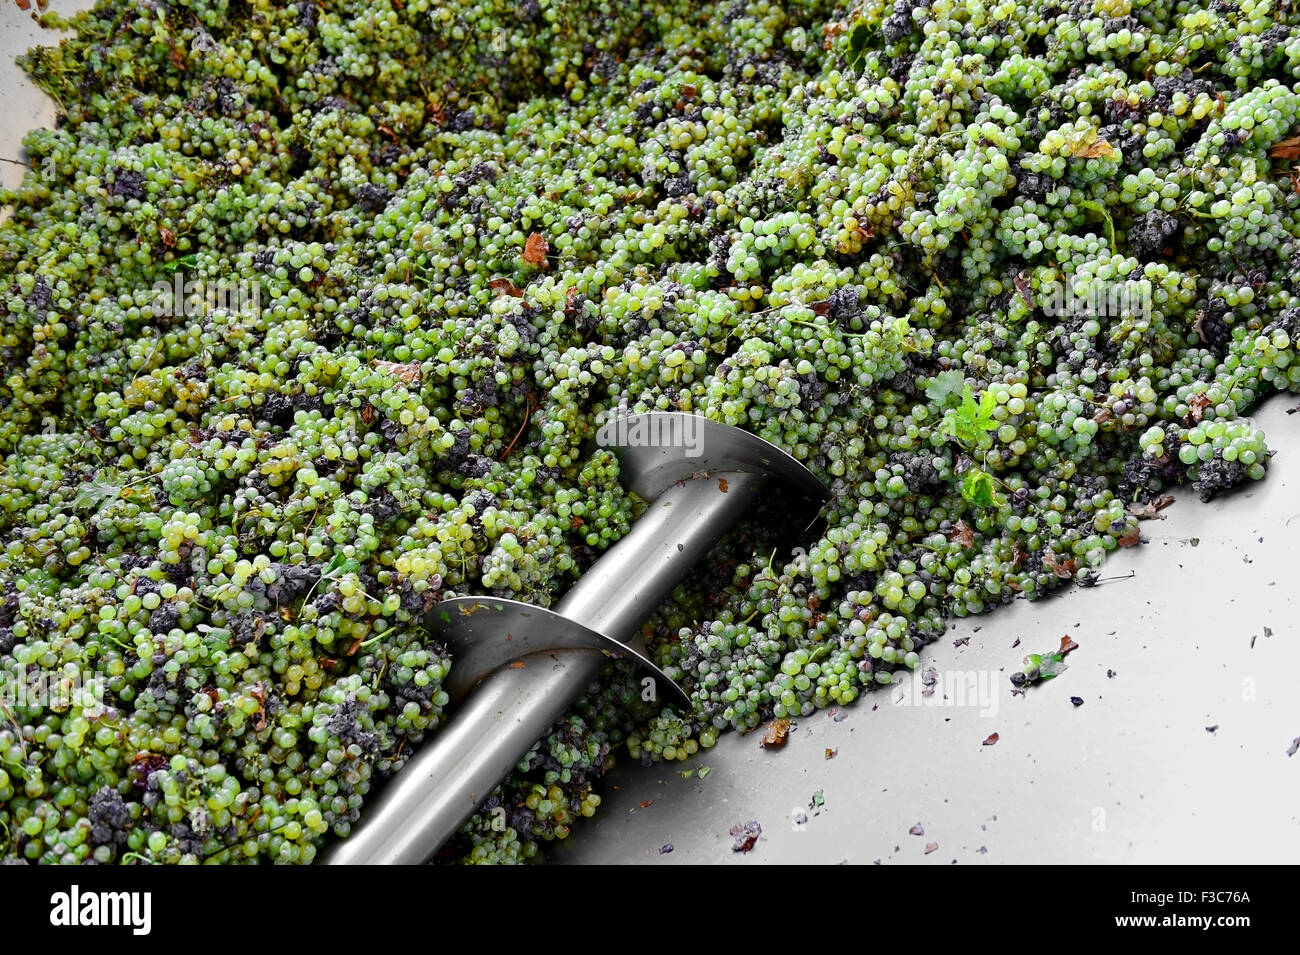 Different types of grapes are crushed by industrial grape crusher machine Stock Photo